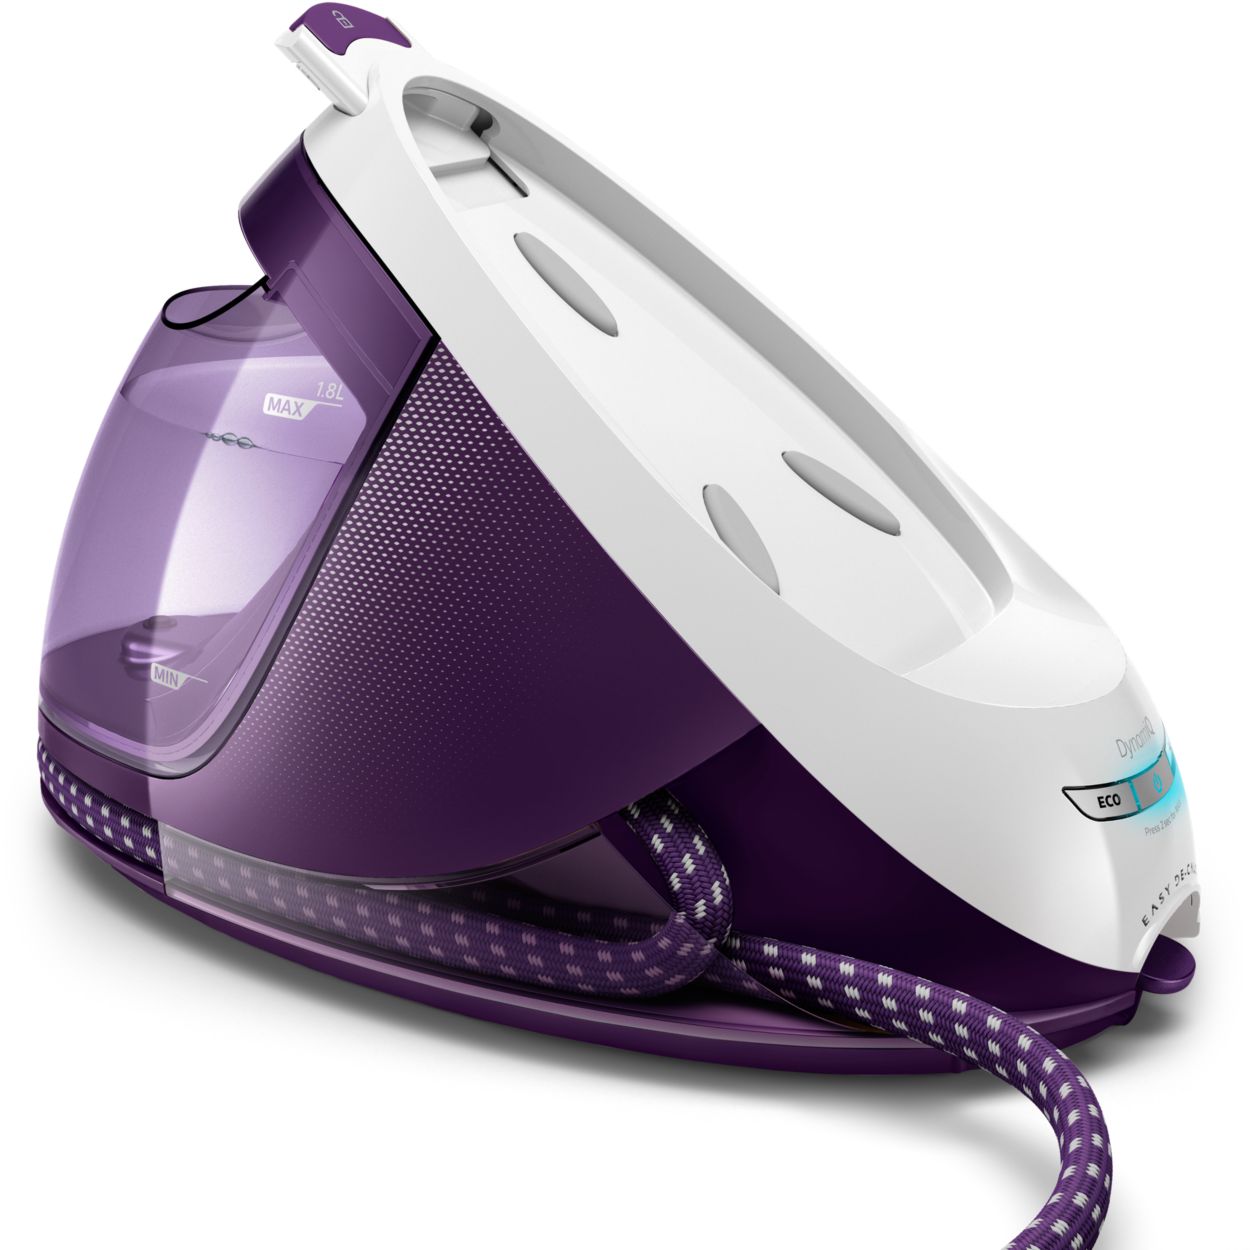 Philips PerfectCare Elite Plus has done the impossible: it made me enjoy  ironing